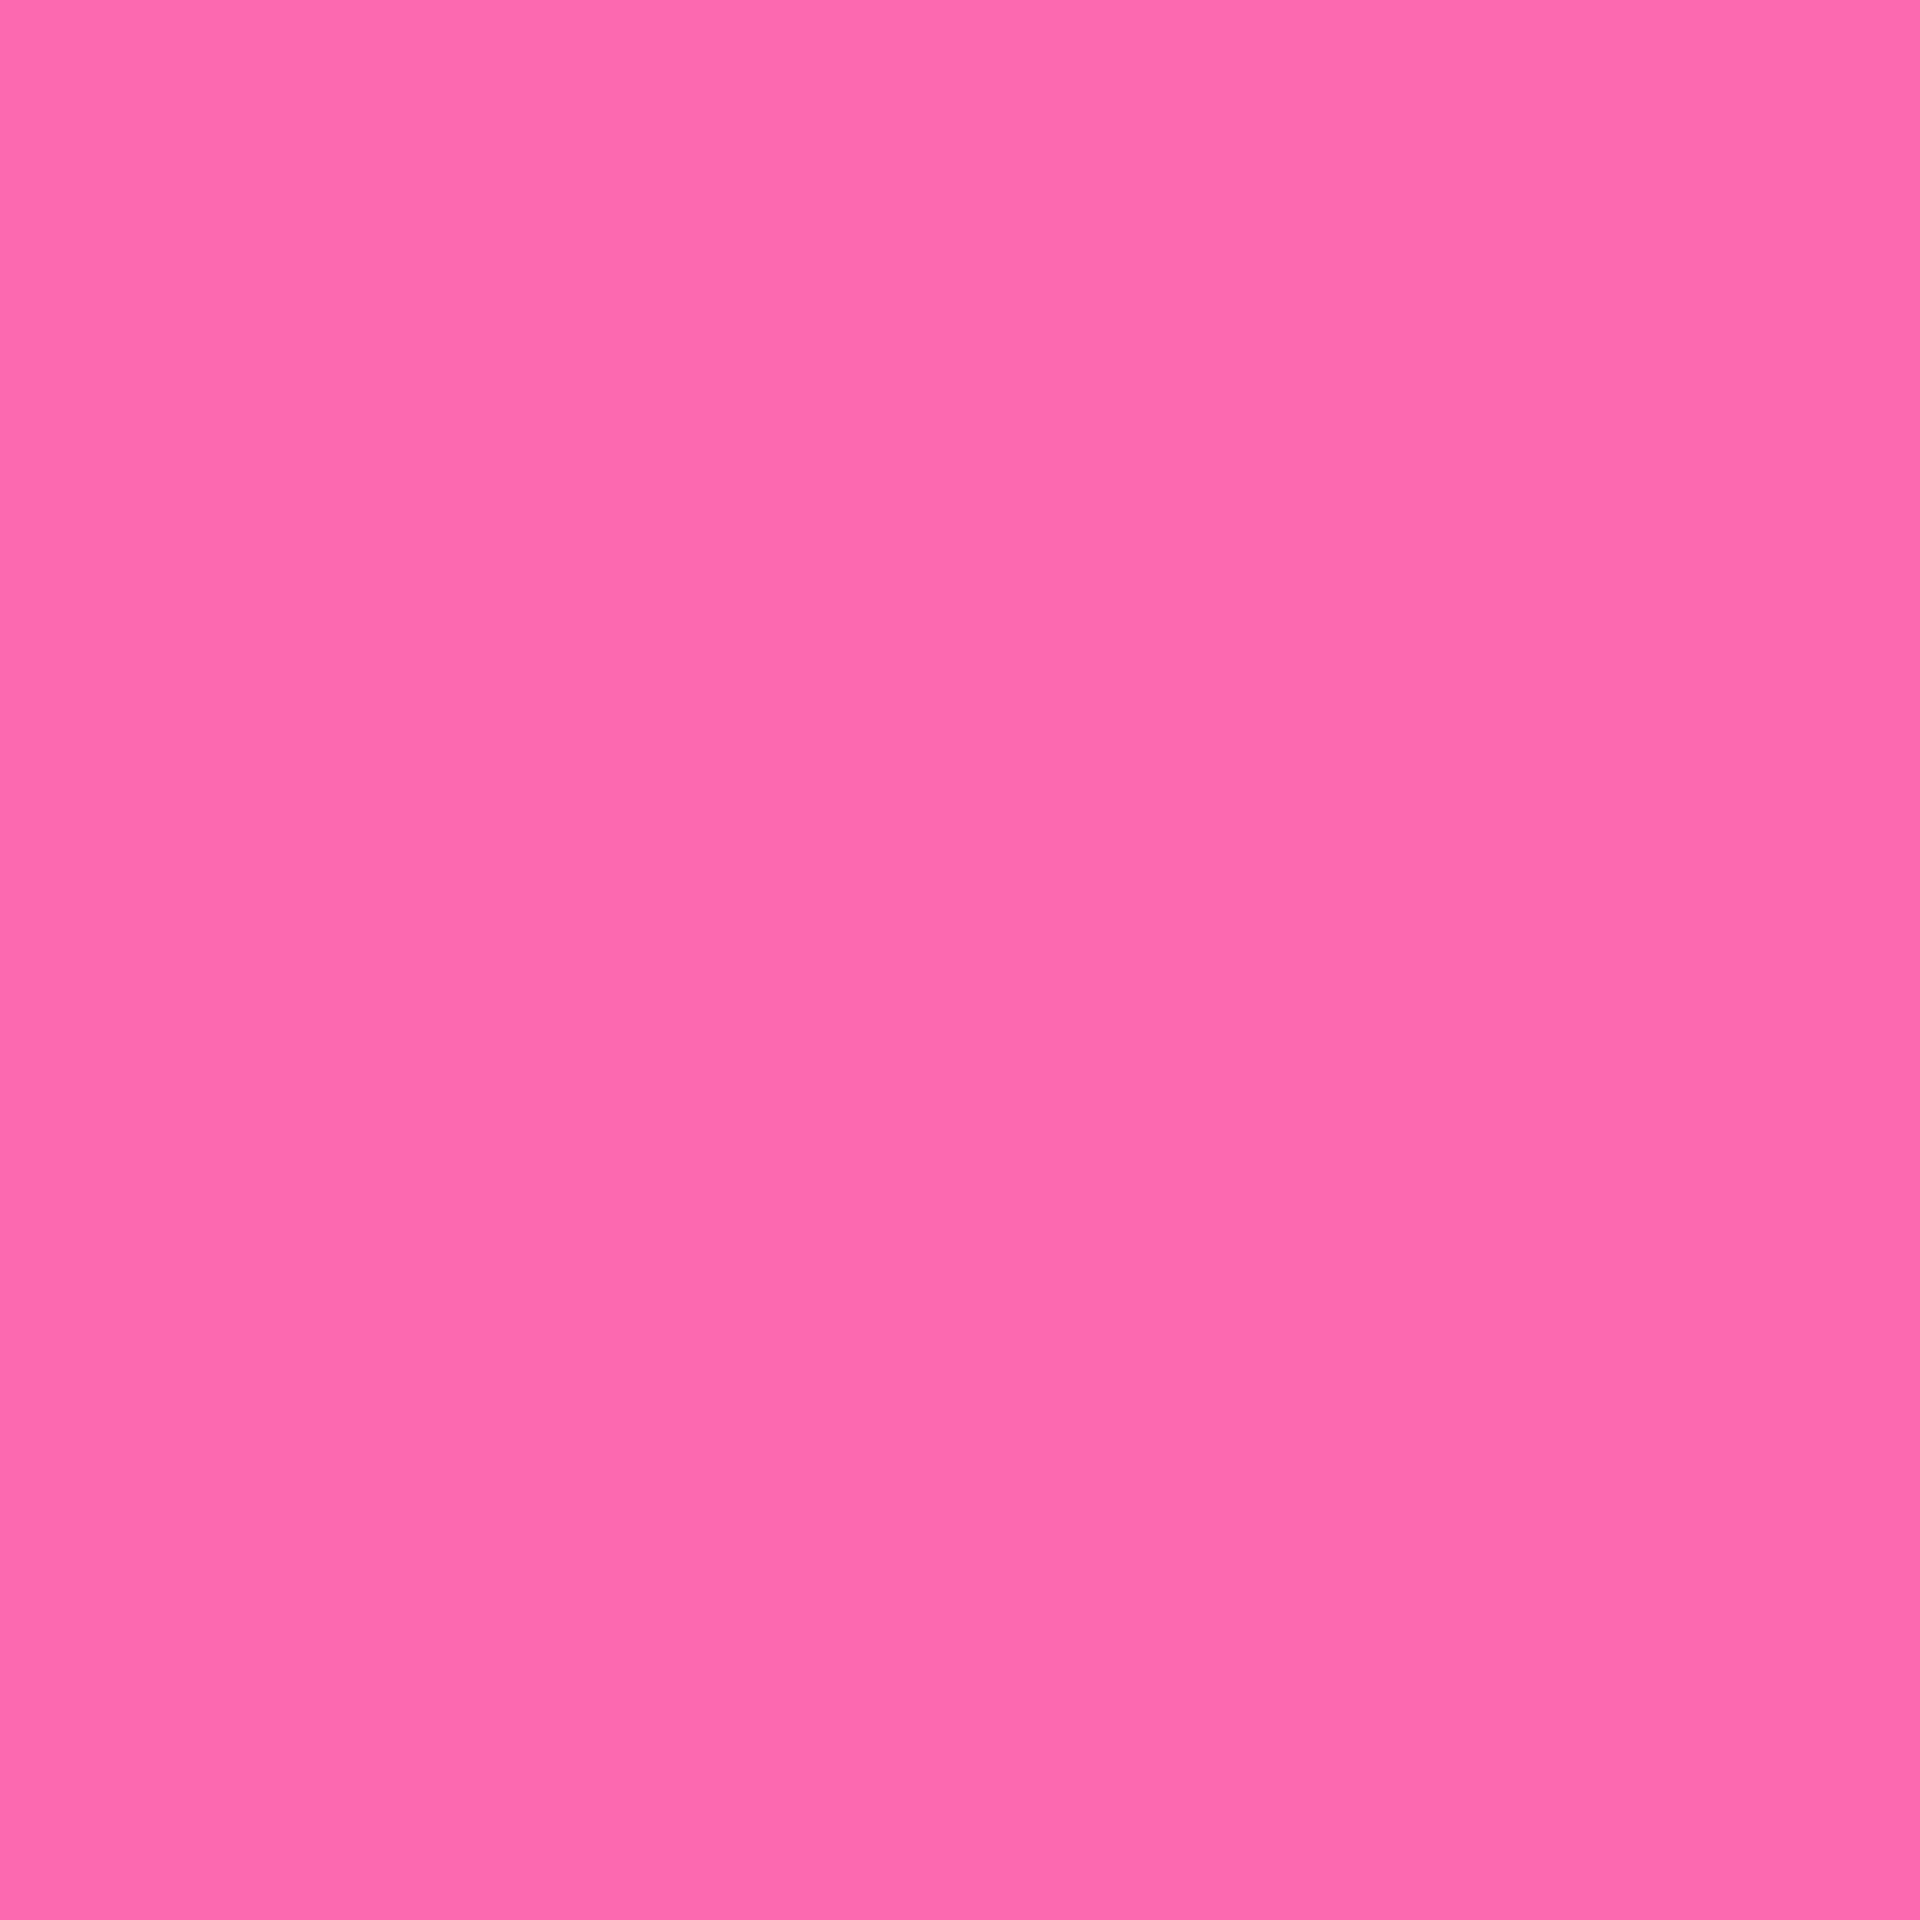 Vibrant Pink SolidBackground